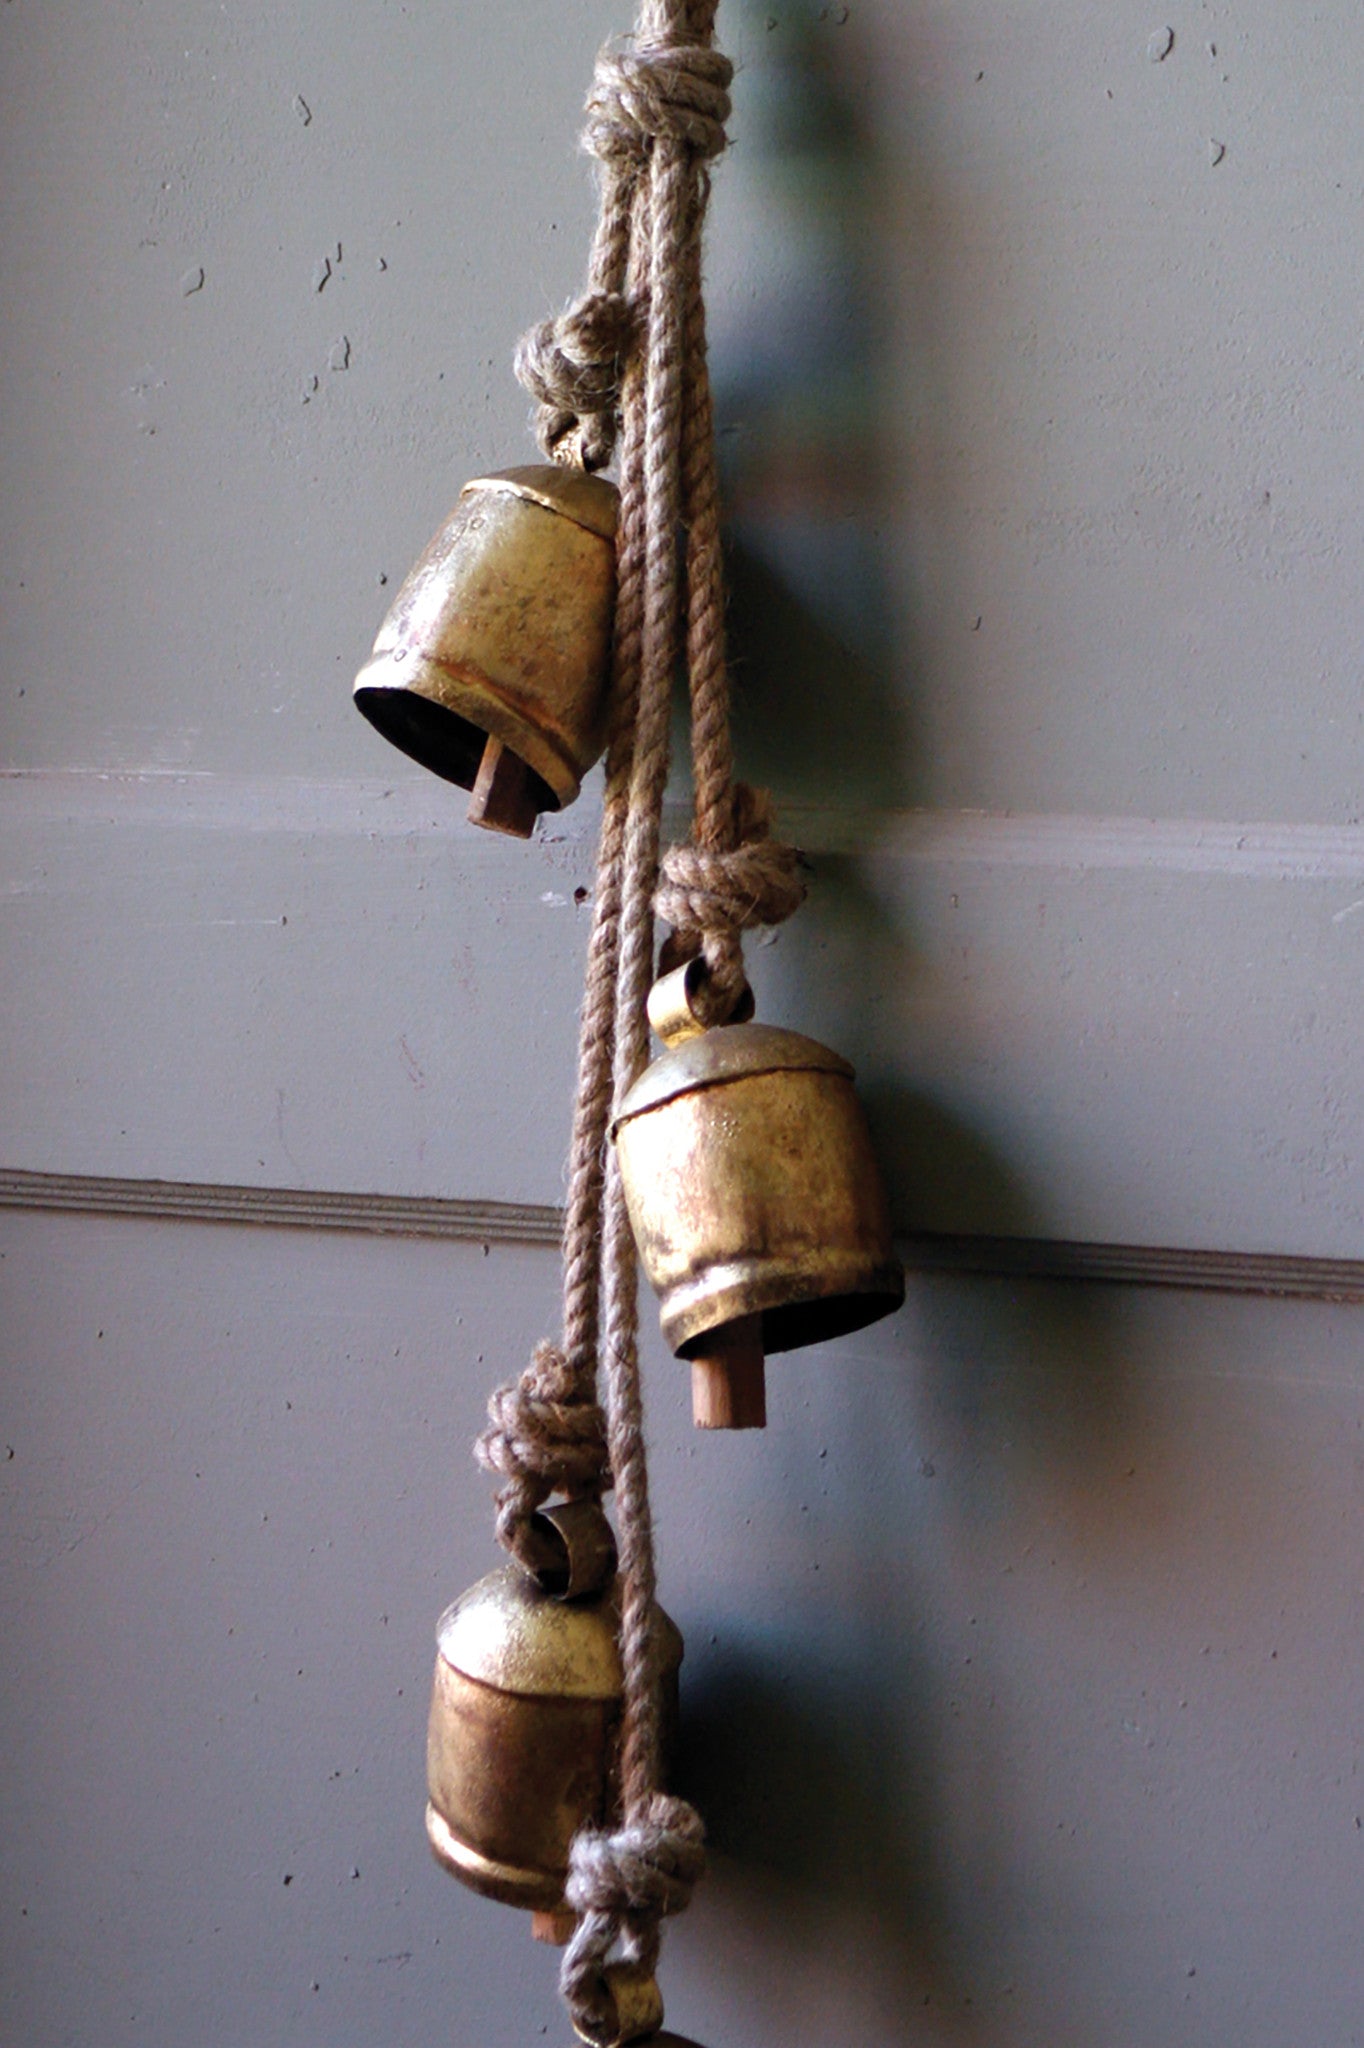 Rustic Iron Hanging Bells With Rope